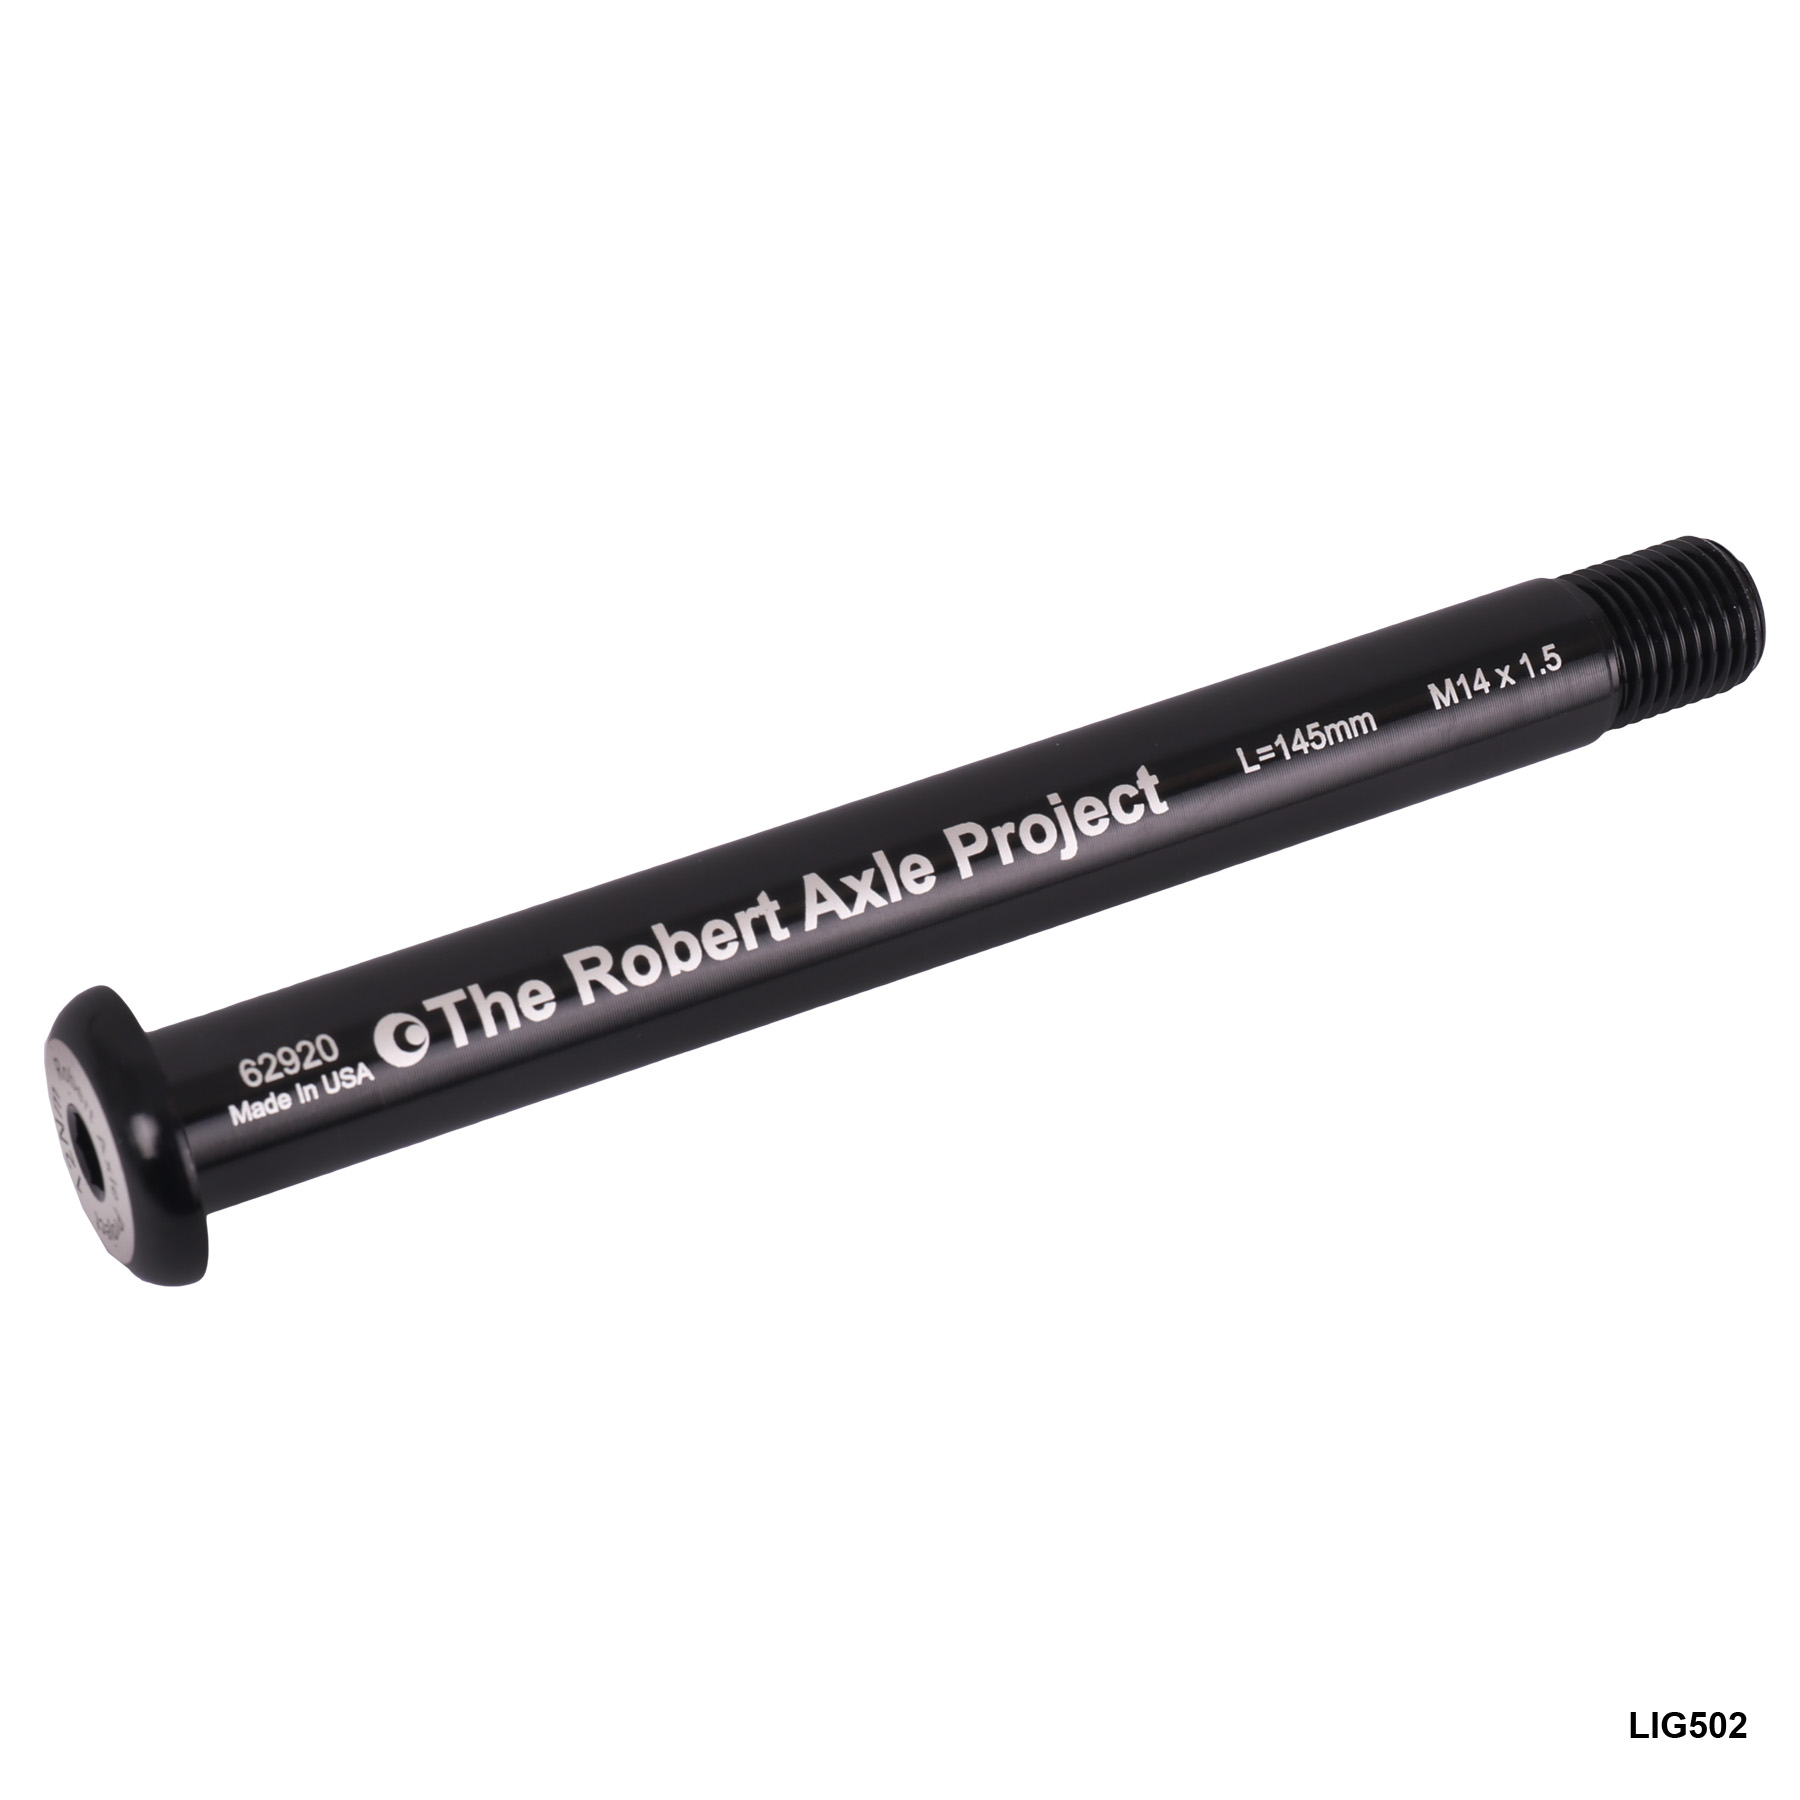 Picture of The Robert Axle Project - Lightning Thru Axle for Front Wheel - 15x100/110mm - M14x1.5 133-155mm - LIG502/504/508/509